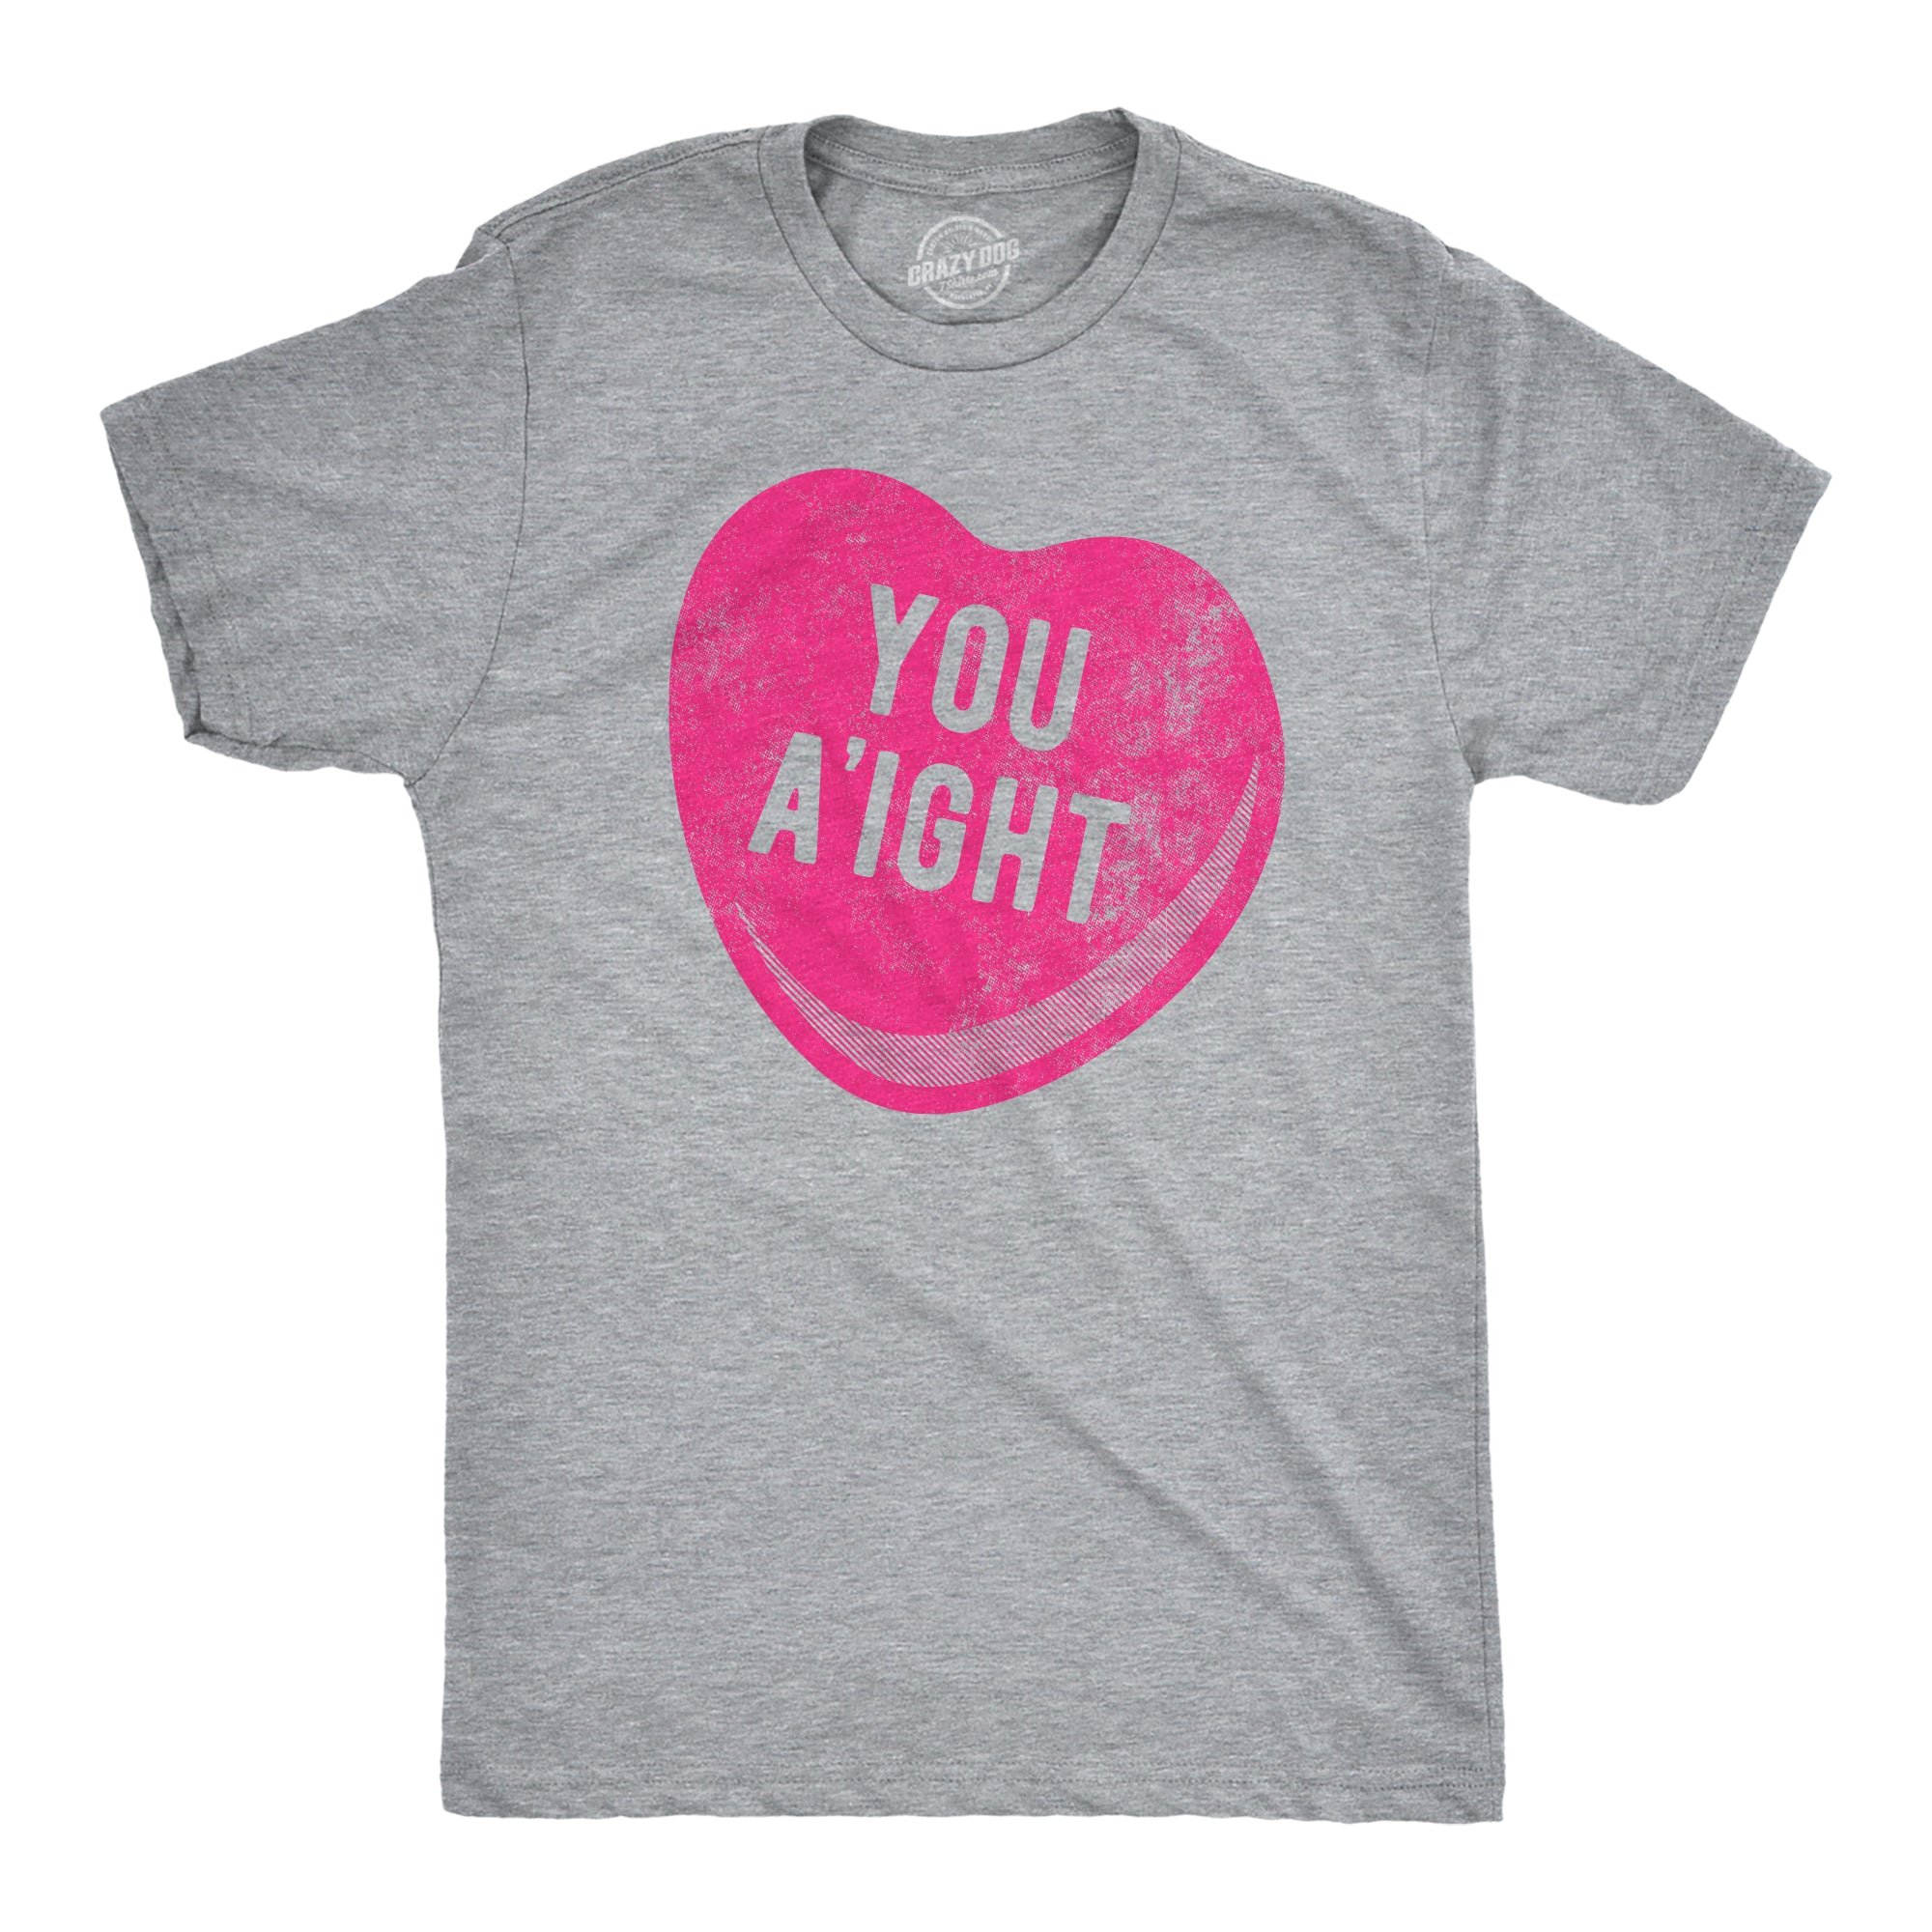 Funny Light Heather Grey - You Aight You Aight Mens T Shirt Nerdy Valentine's Day Sarcastic Tee